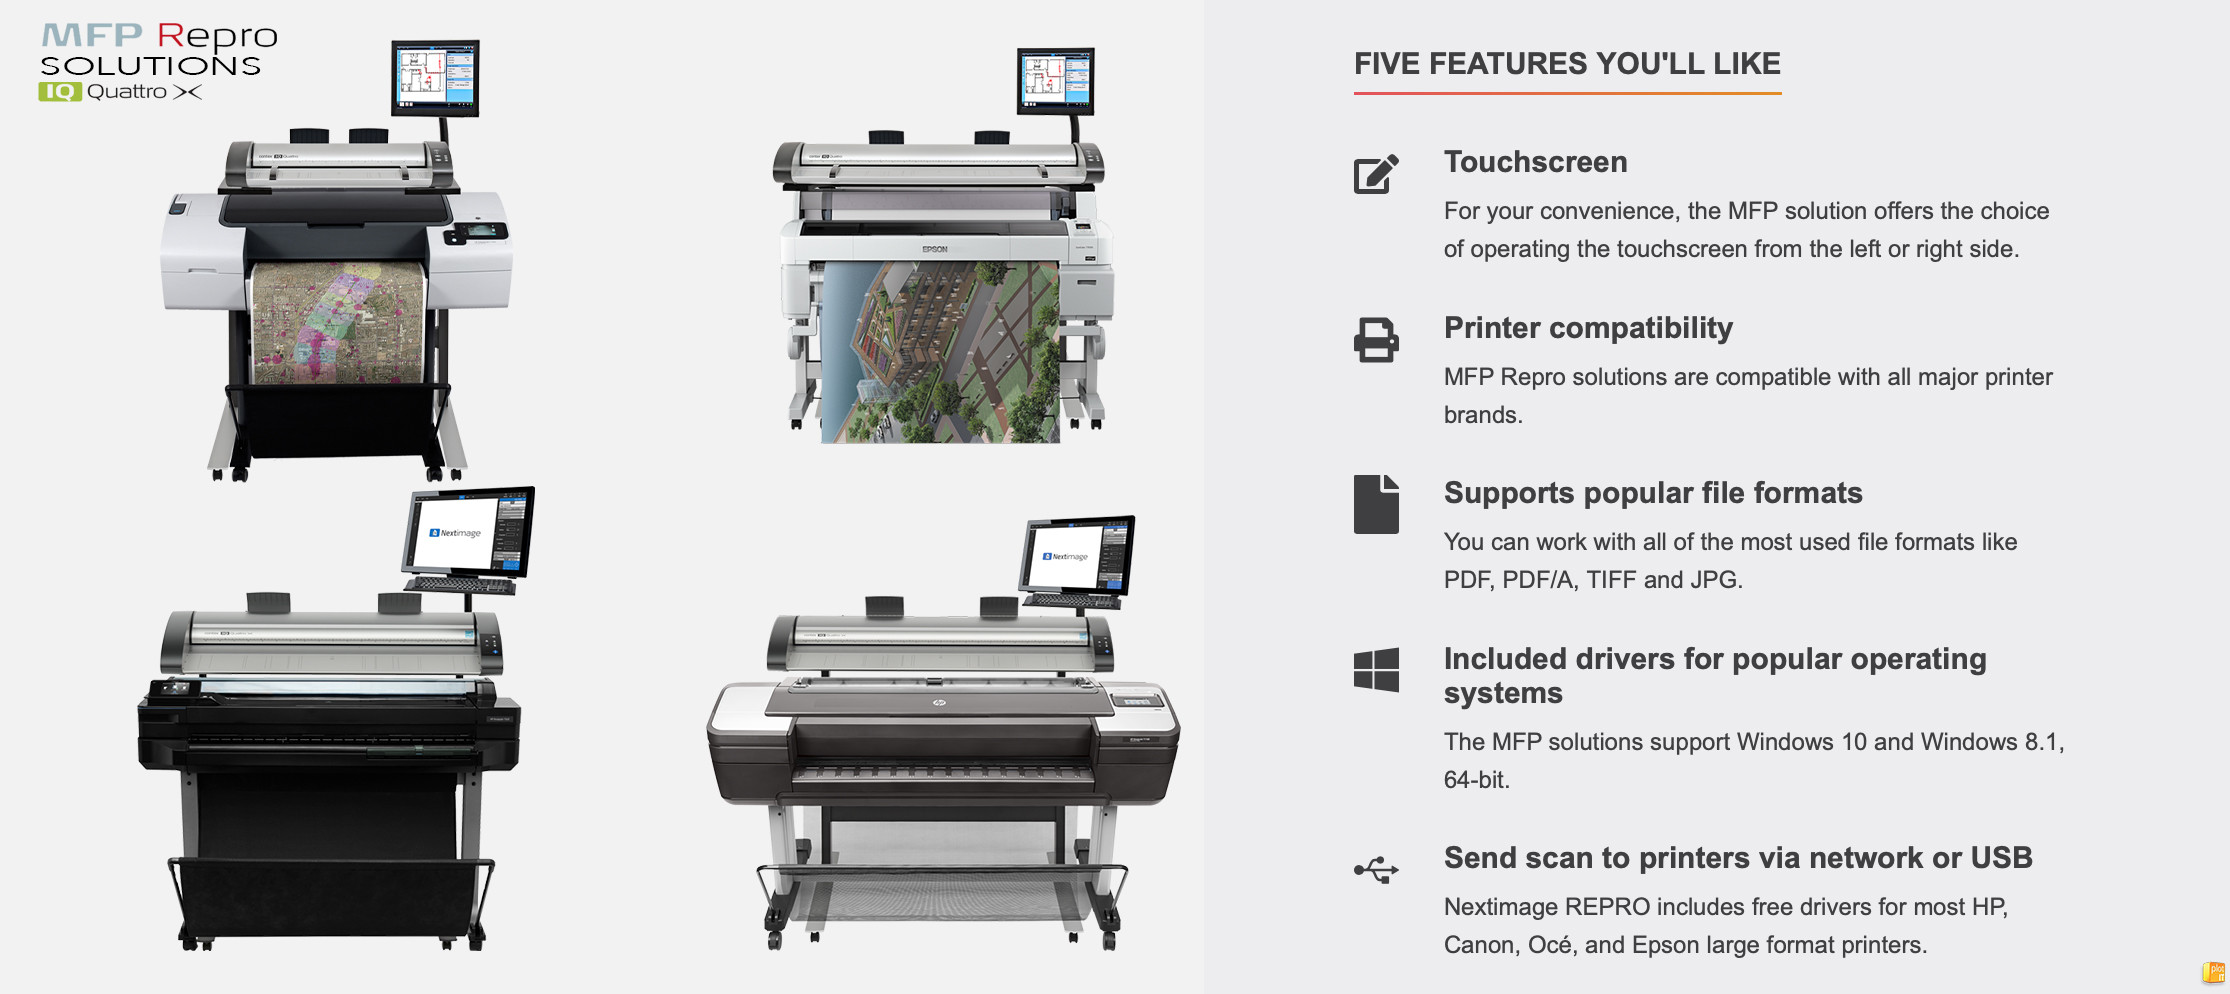 CONTEX_MFP SOLUTIONS_5 FEATURES